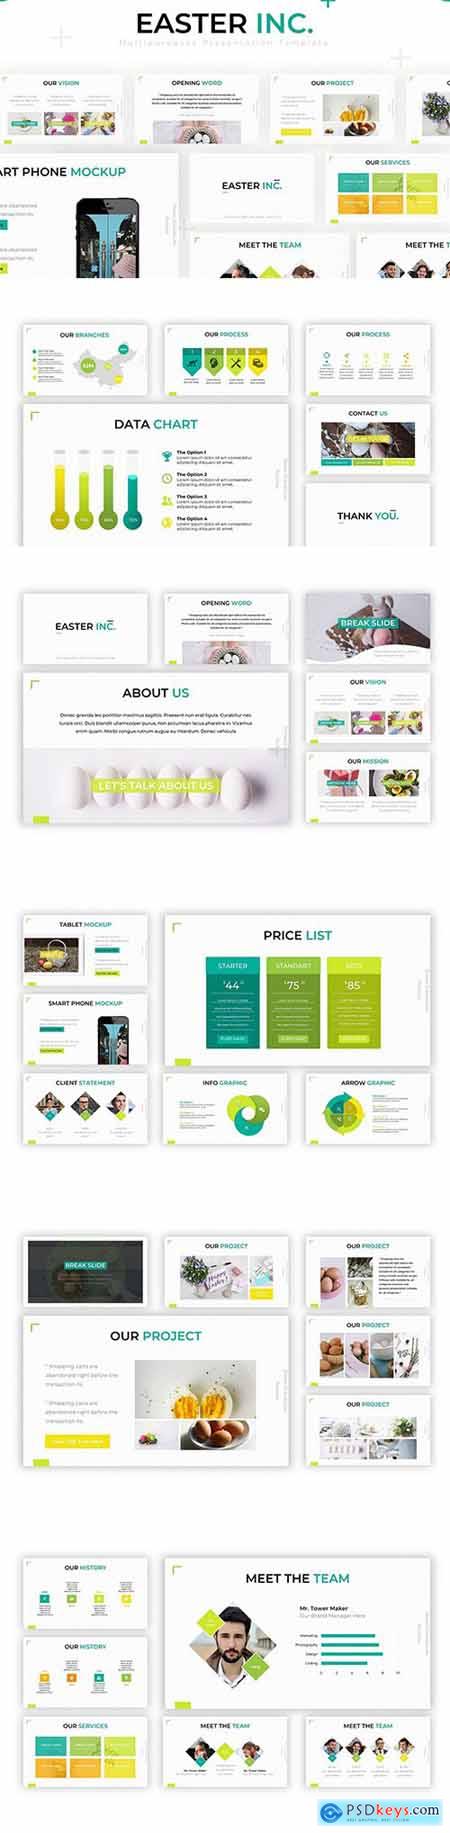 Easter Inc - Powerpoint Template